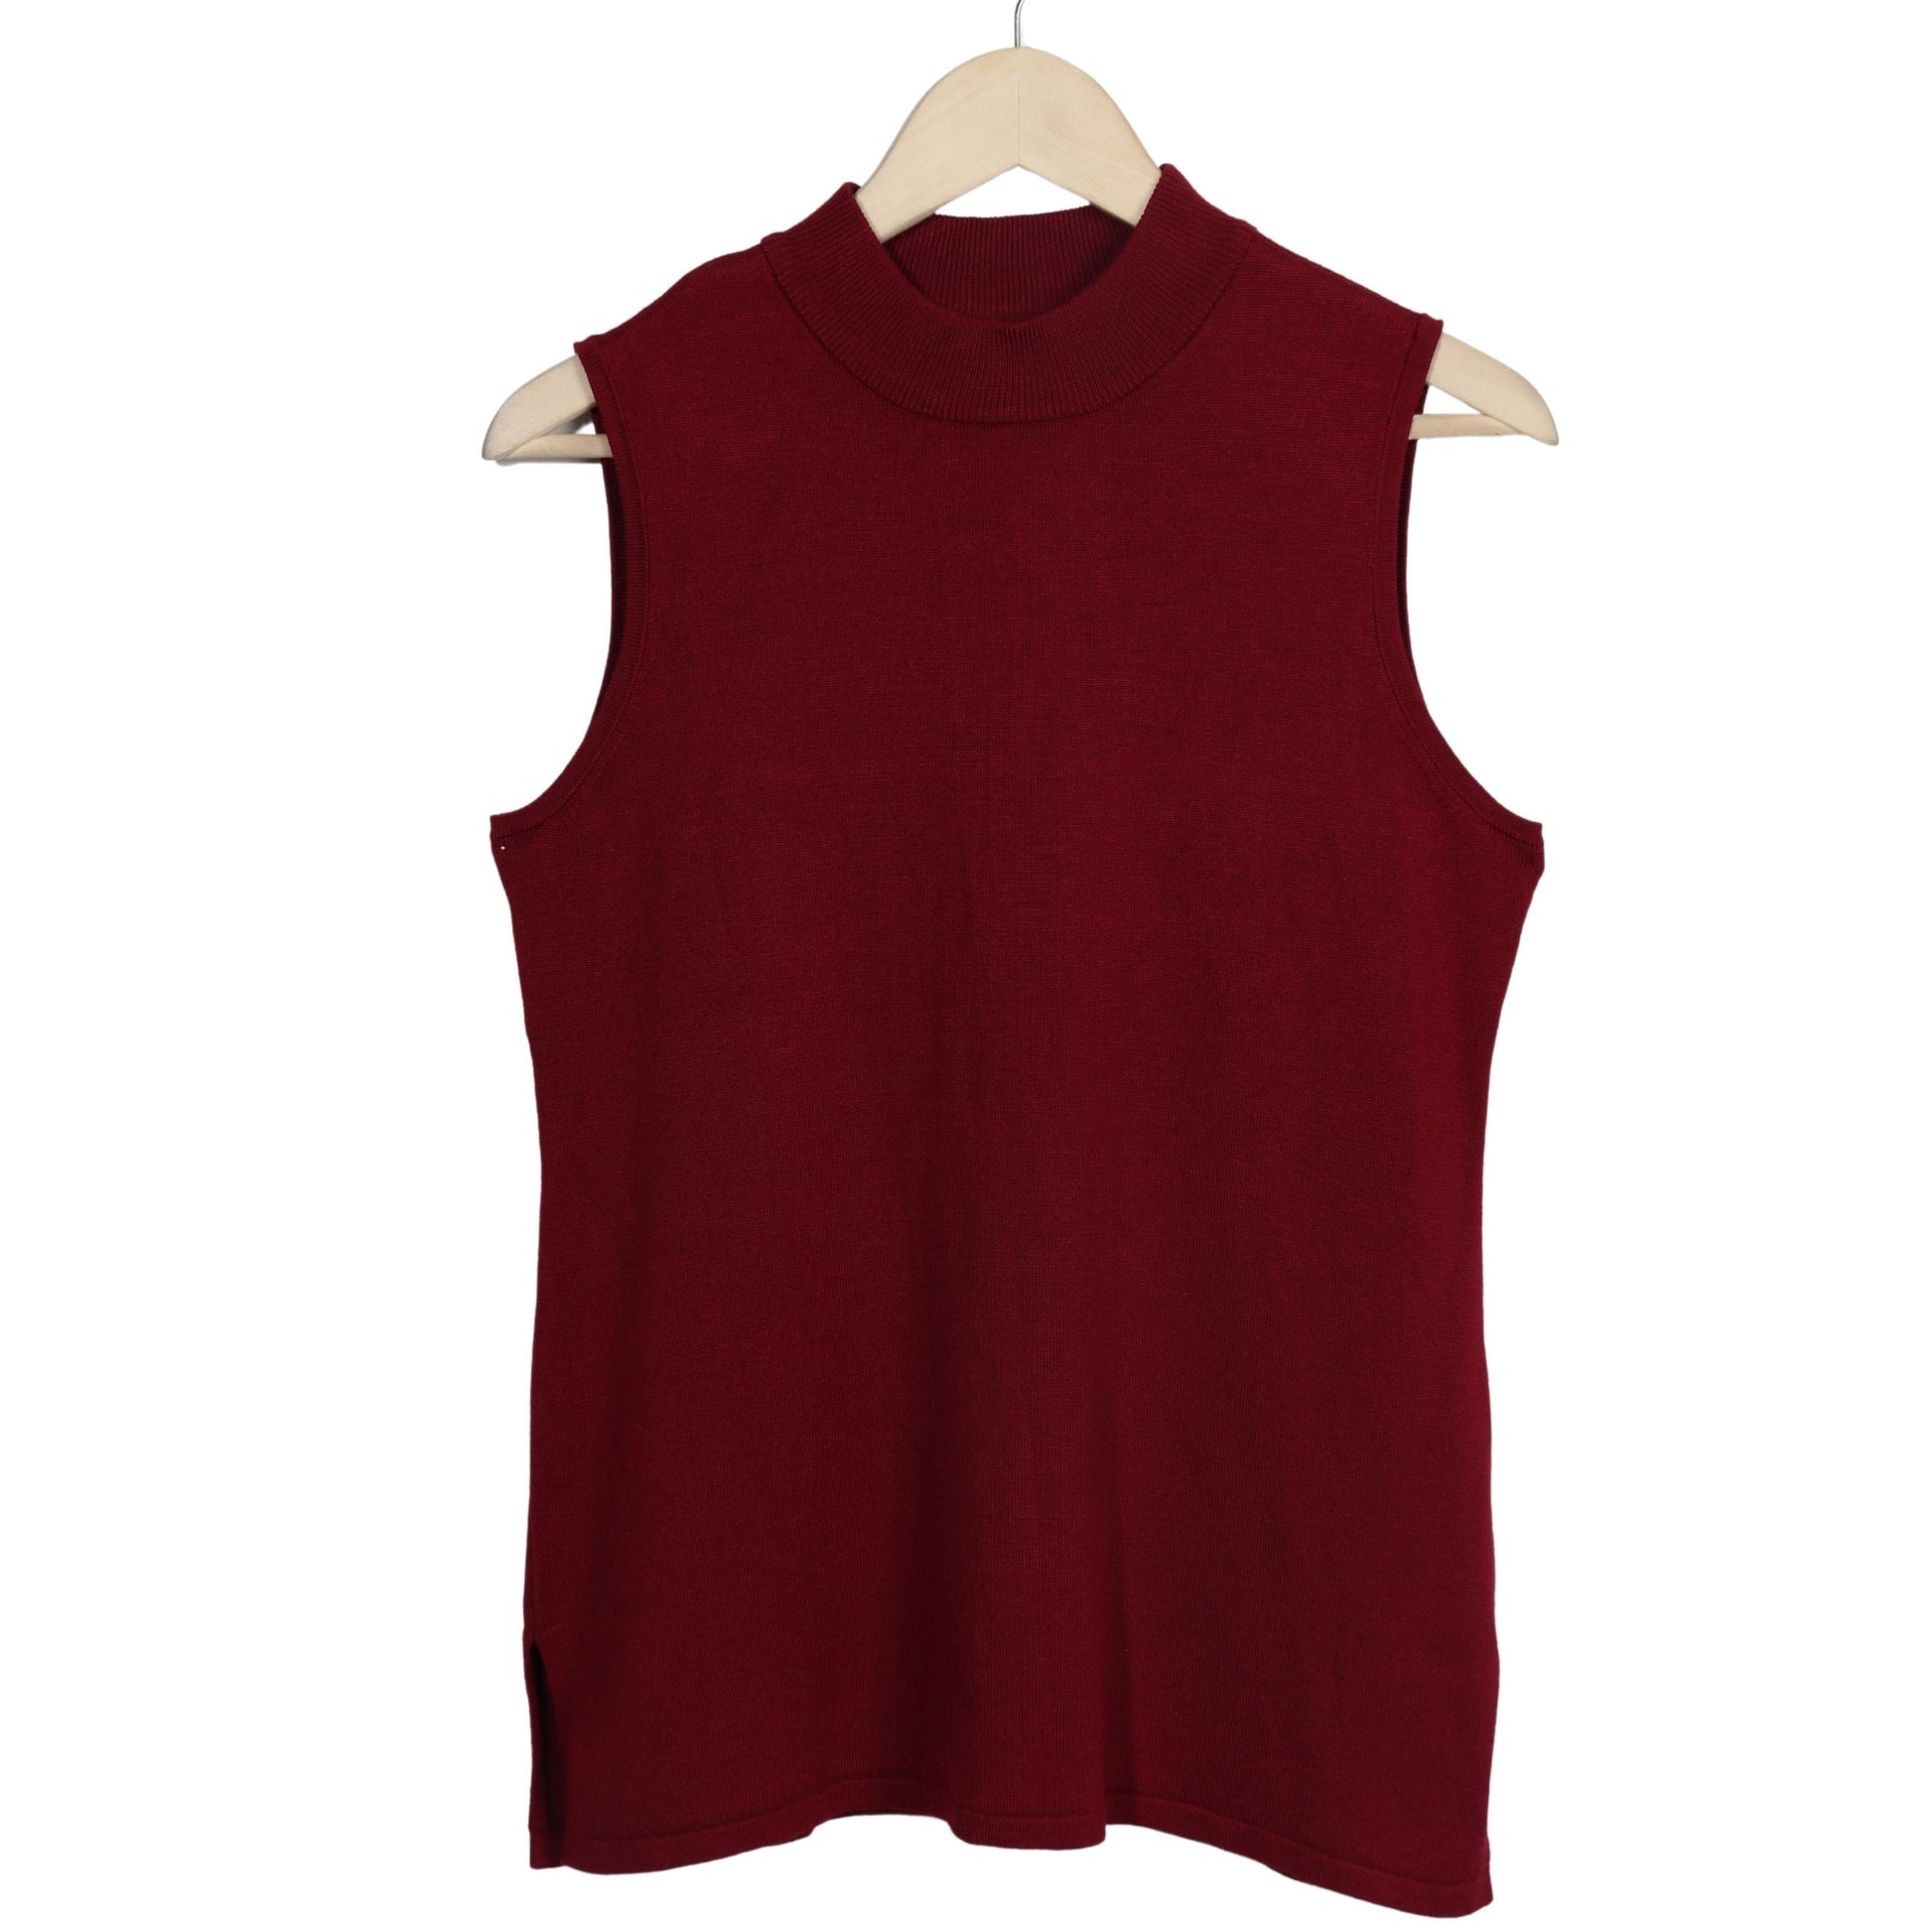 JM COLLECTION Womens Tops L / Red JM COLLECTION - Turtle Neck Top